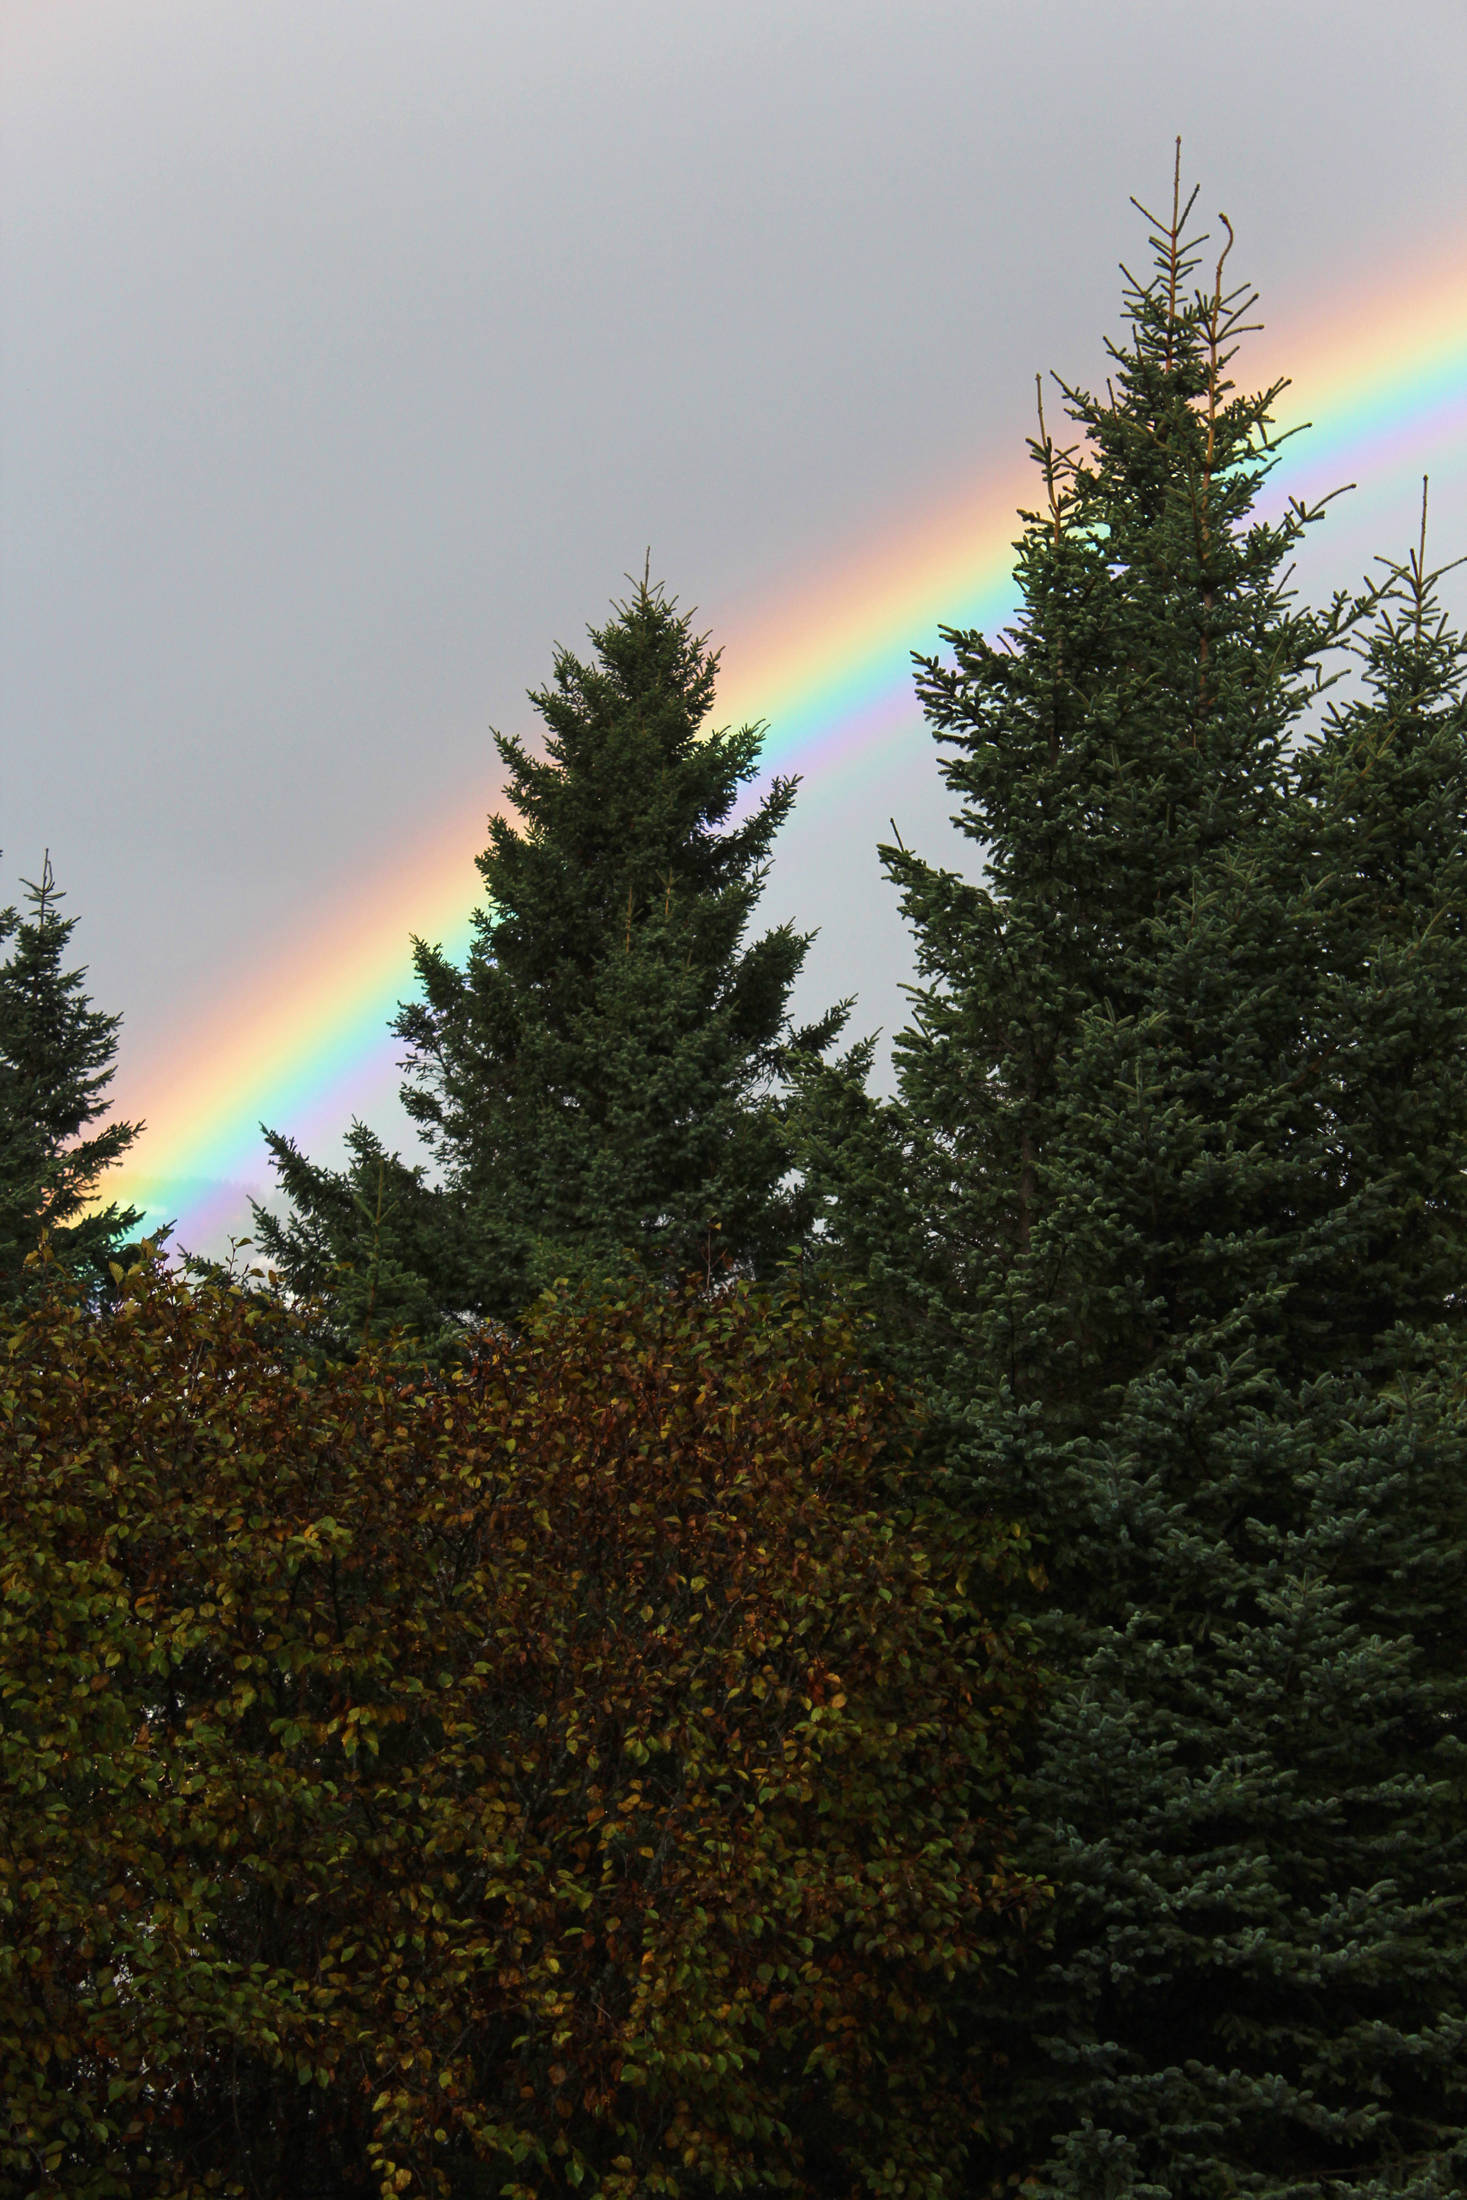 A rainbow peaks out from between the trees near the Homer News office on Tuesday, Oct. 16, 2018 in Homer, Alaska. A double rainbow was spotted in a few different places around town between periods of rain. (Photo by Megan Pacer/Homer News)